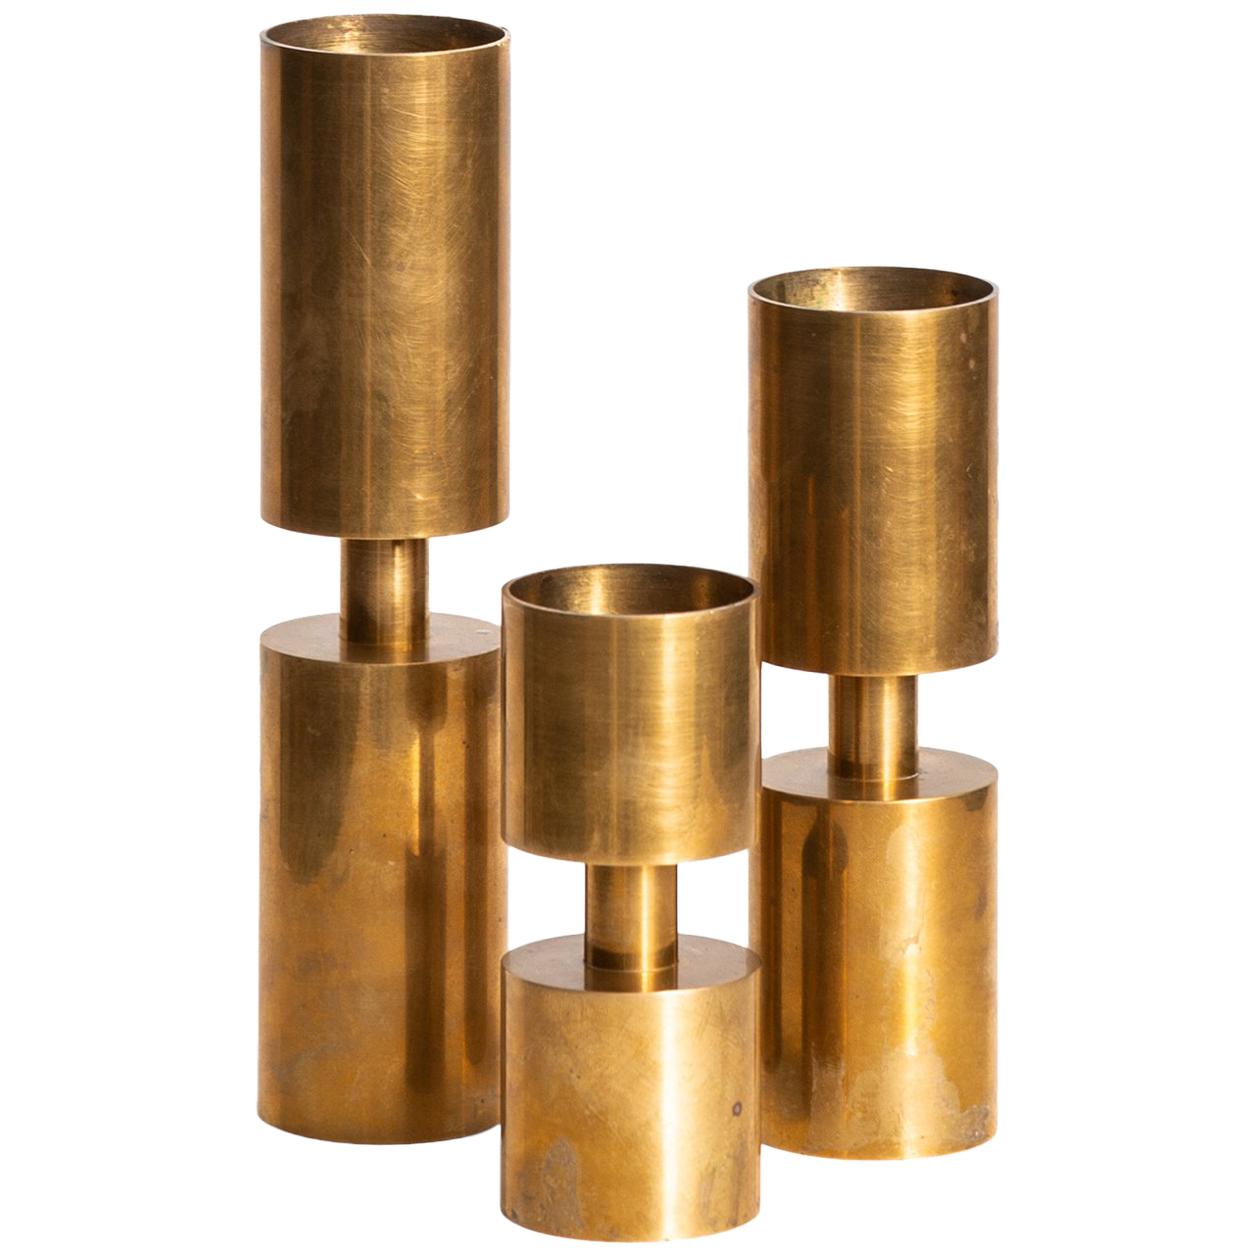 Thelma Zoéga Candlesticks in Brass Produced in Sweden